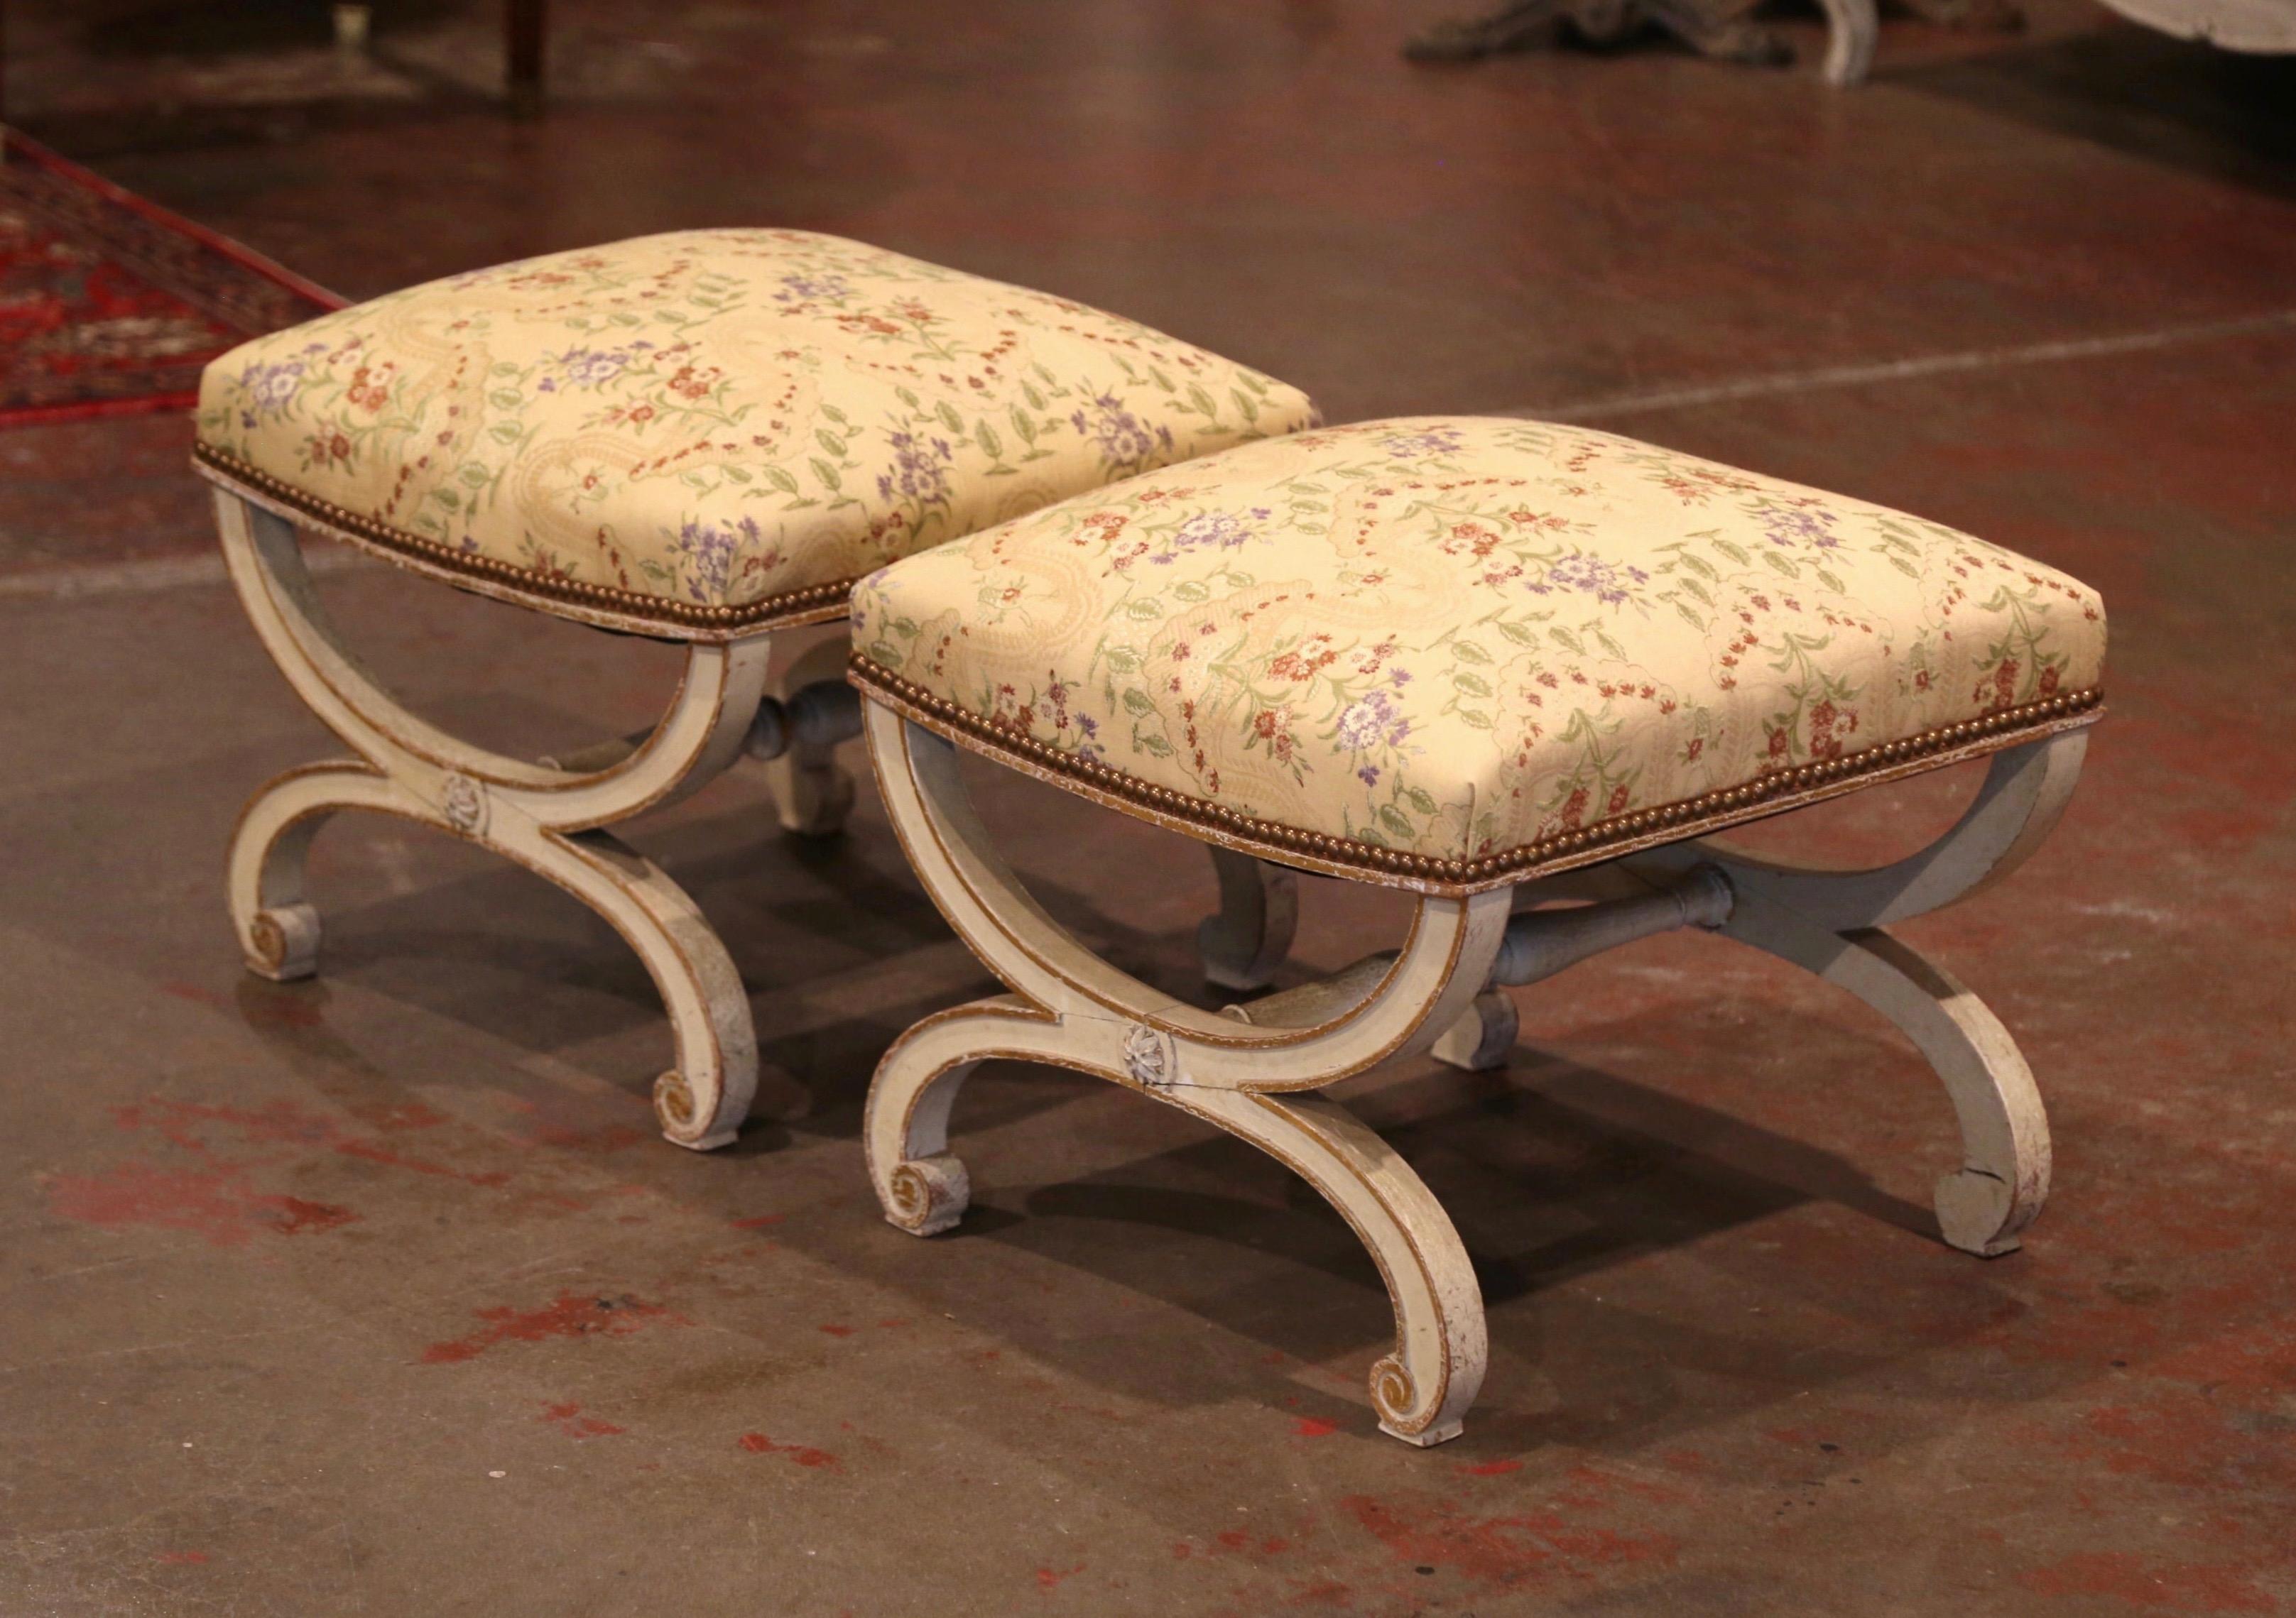 Embellish your formal living room with this elegant pair of antique stools; crafted in France circa 1860, these stools known as 